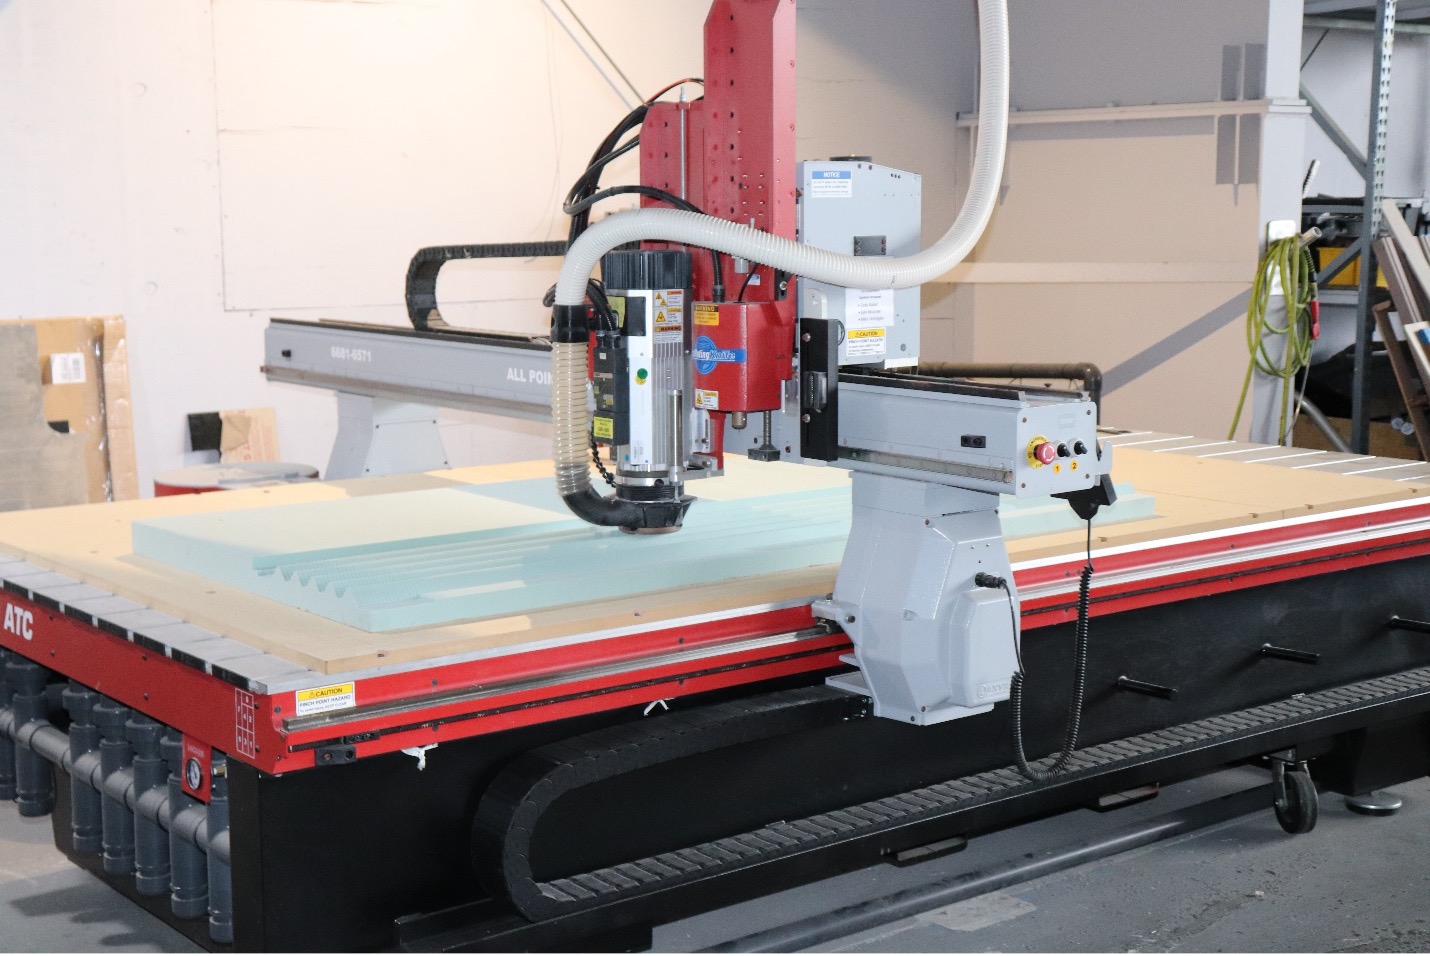 CNC 3-Axis Router with a routing area of 6’x10’x6” with accuracy of +/-0.010”